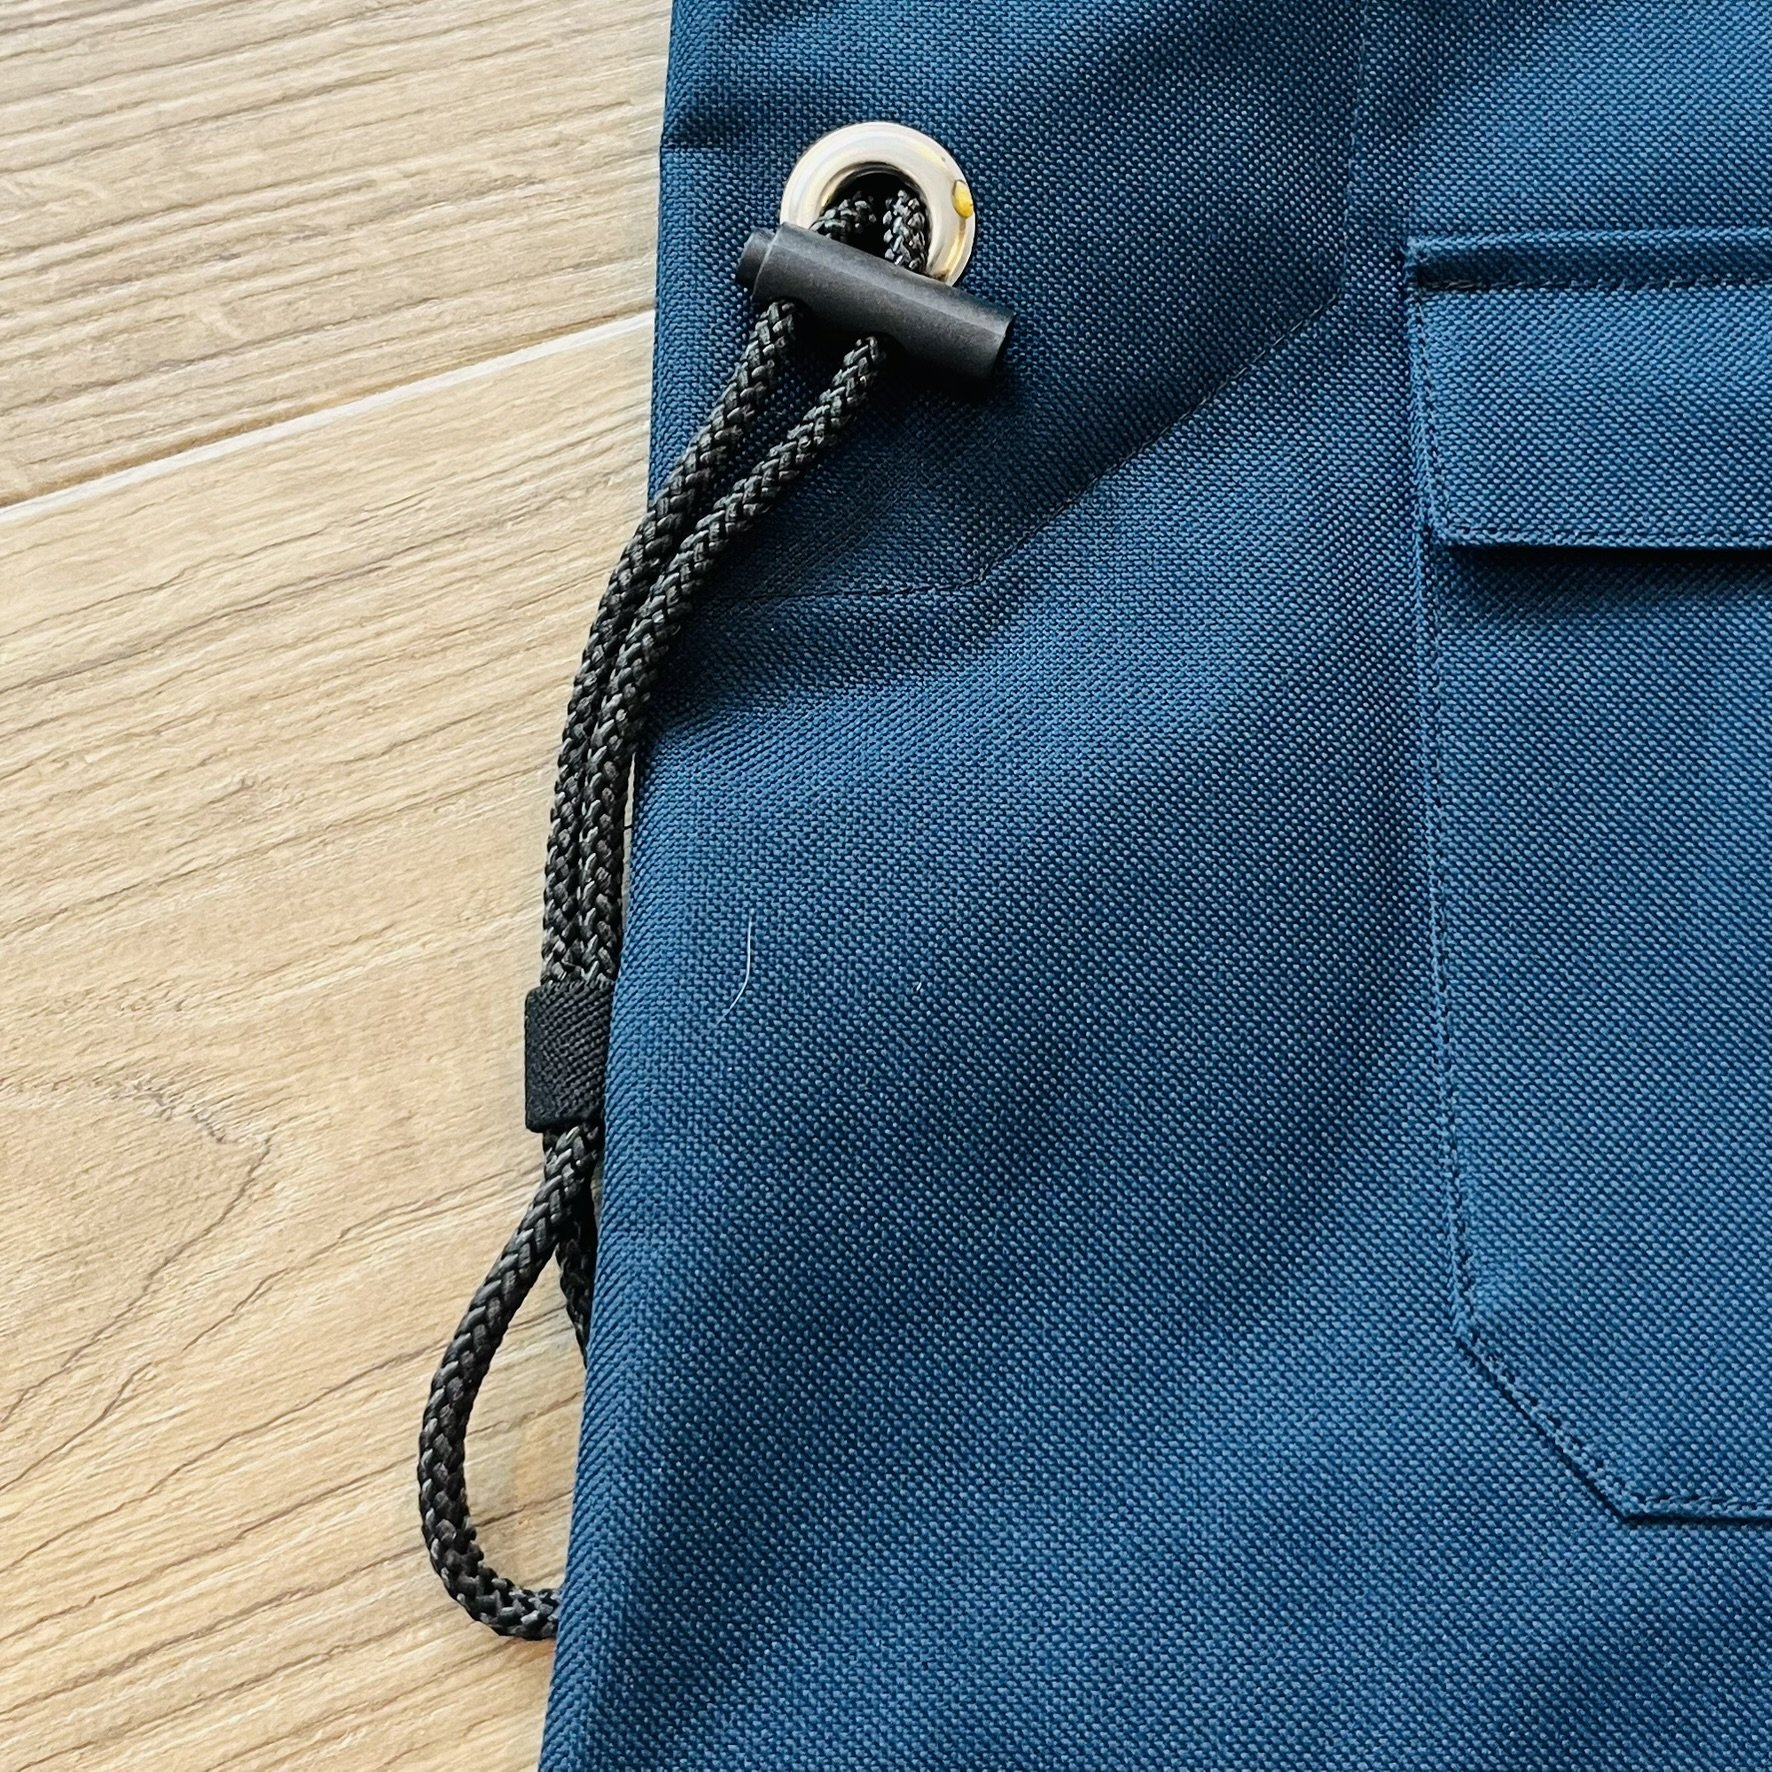 Rear cinch cord holds smaller items on the outside of the bag...